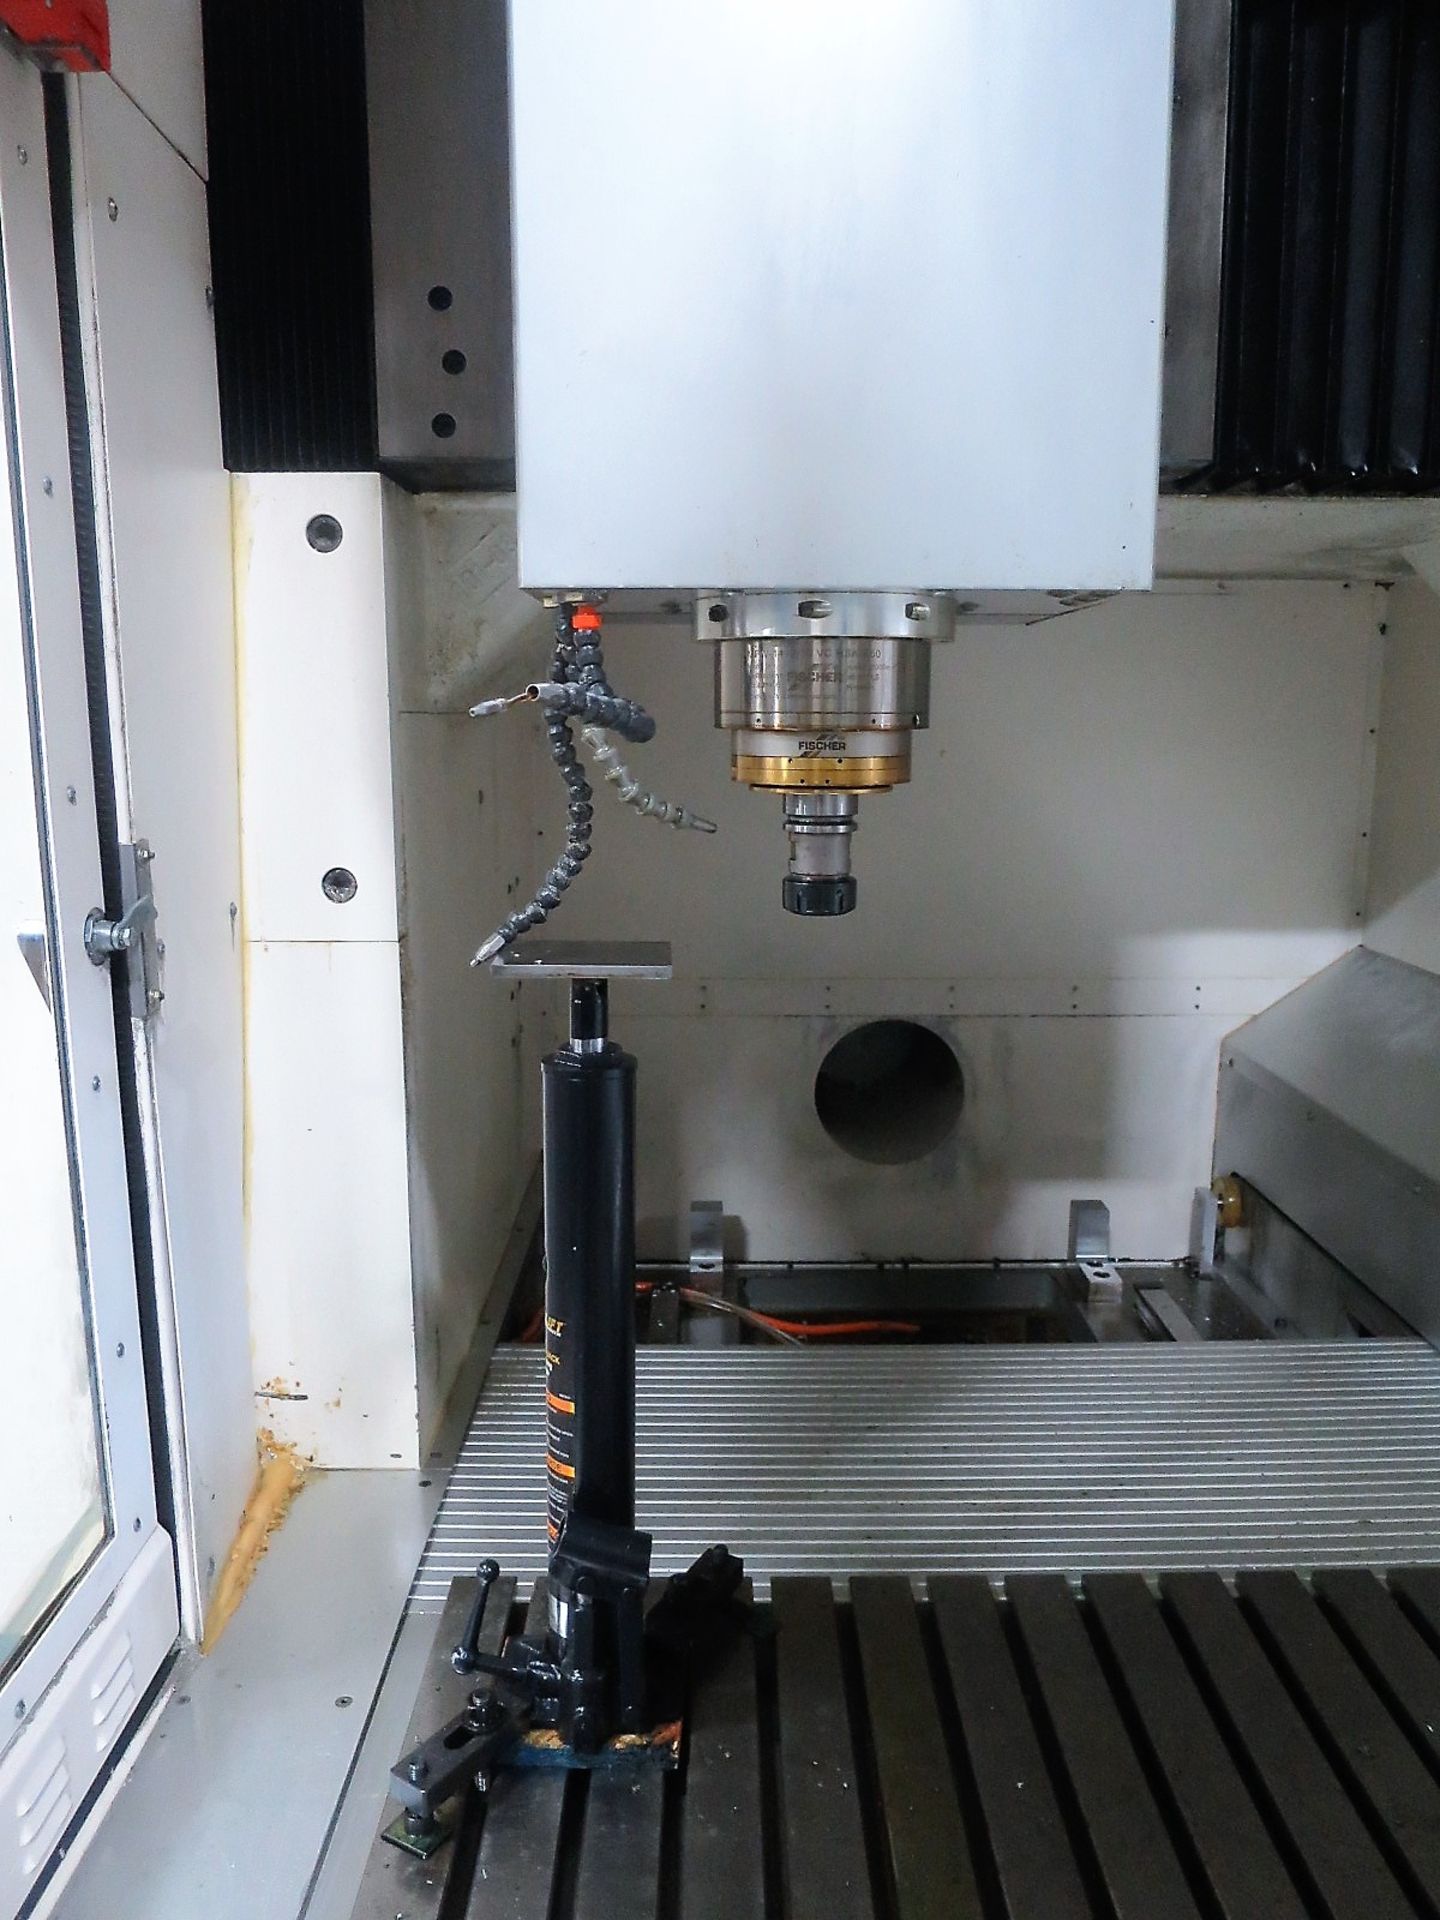 RODERS RFM 1000 CNC 3-AXIS VERTICAL MACHINING CENTER, - Image 6 of 16